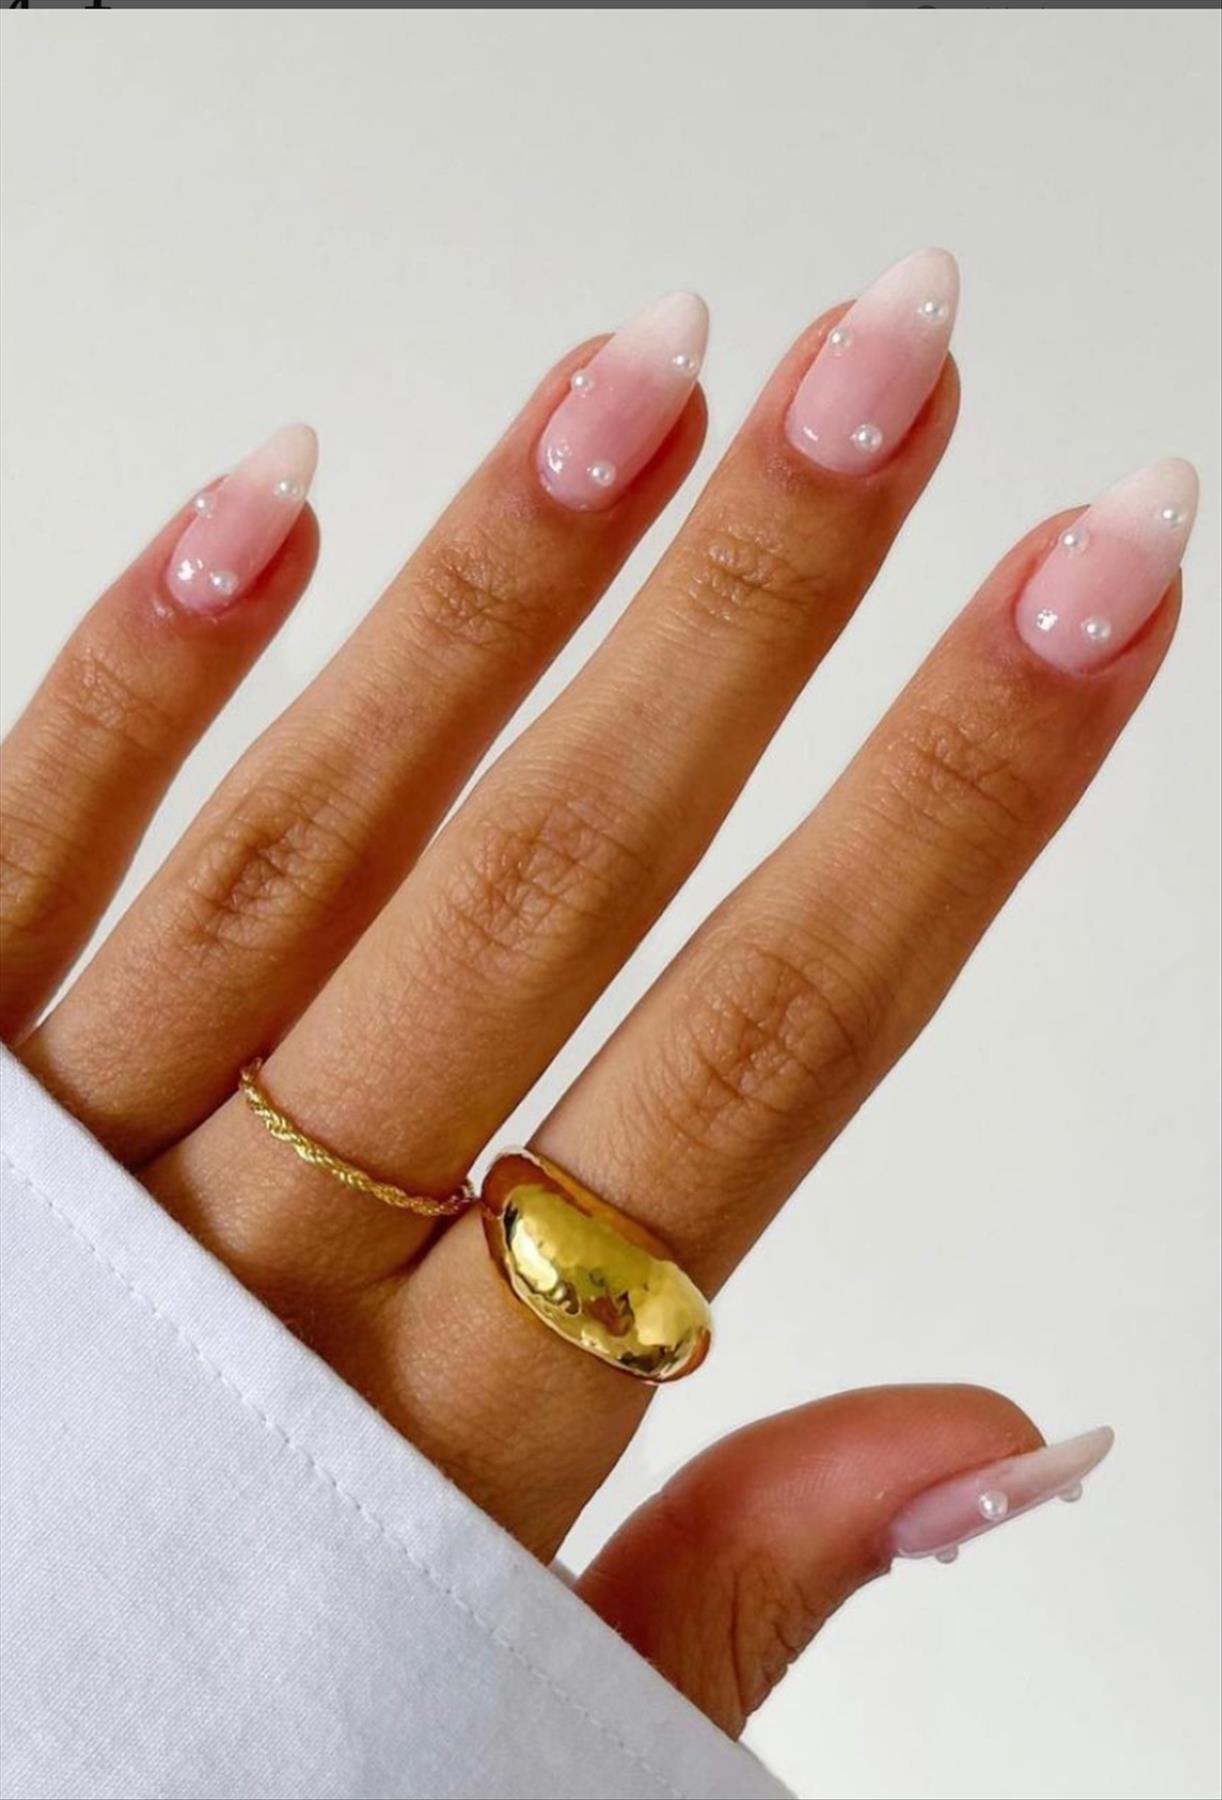 Chic summer nails 2022 color trends you can't miss